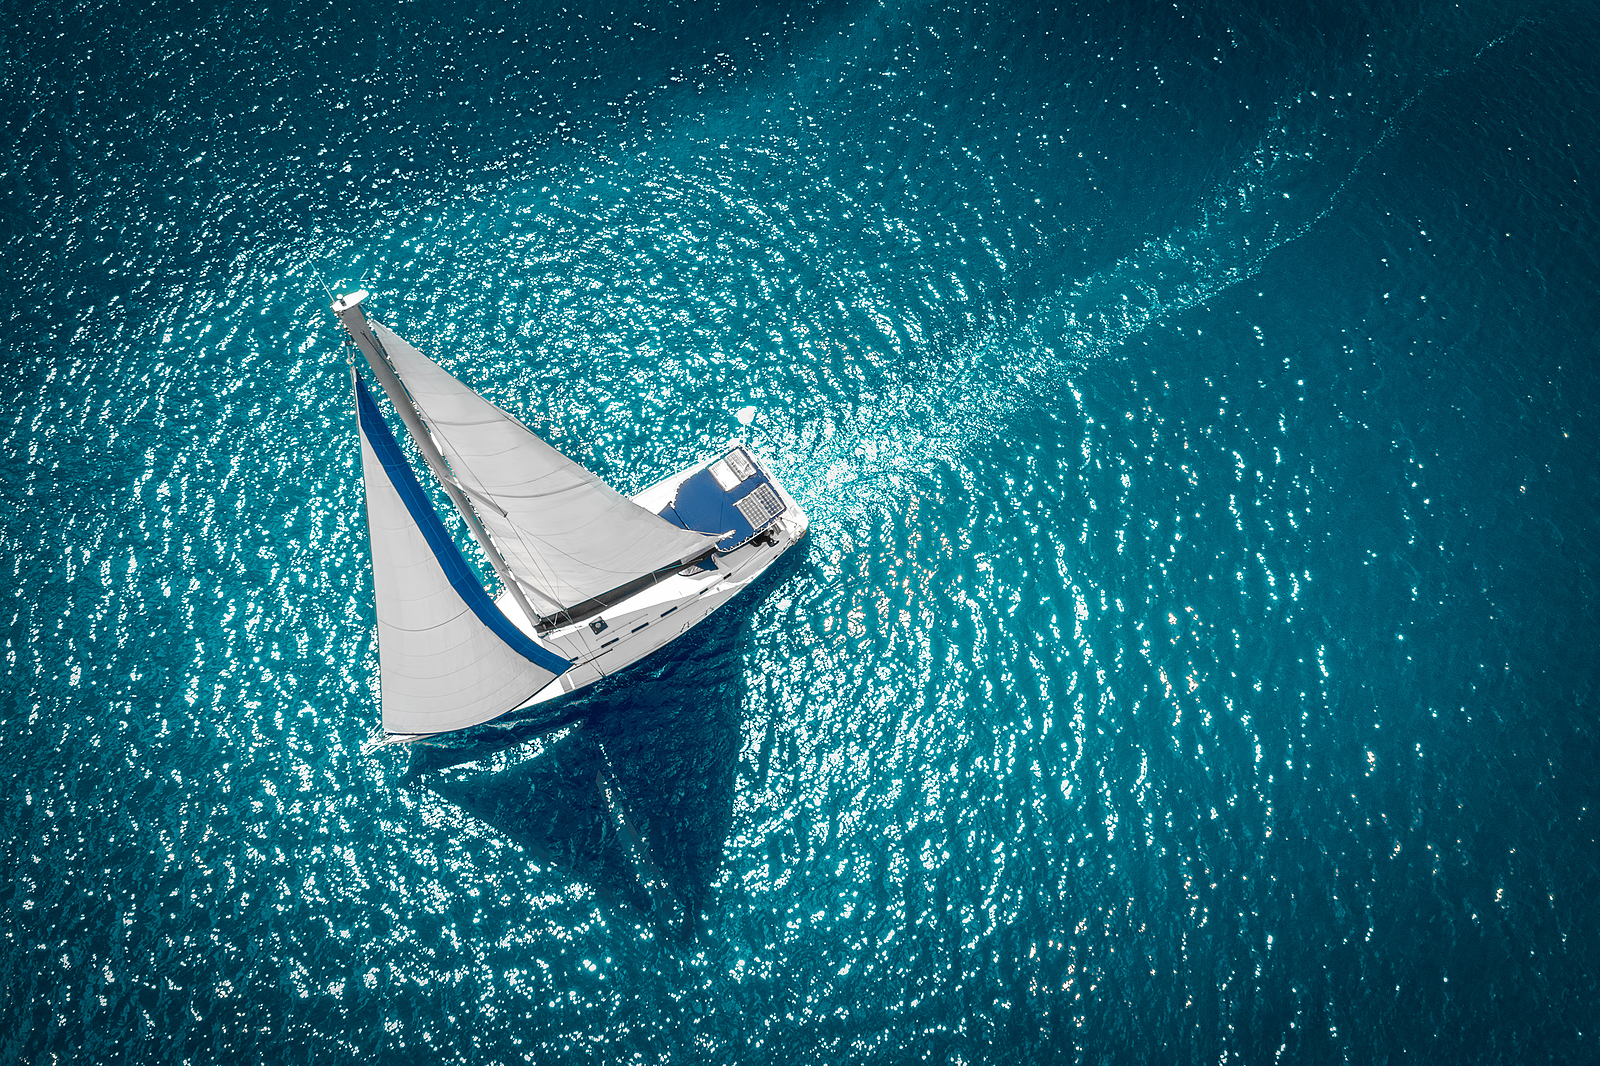 Aerial view of sailboat with white sails on blue waters in windy condition. 